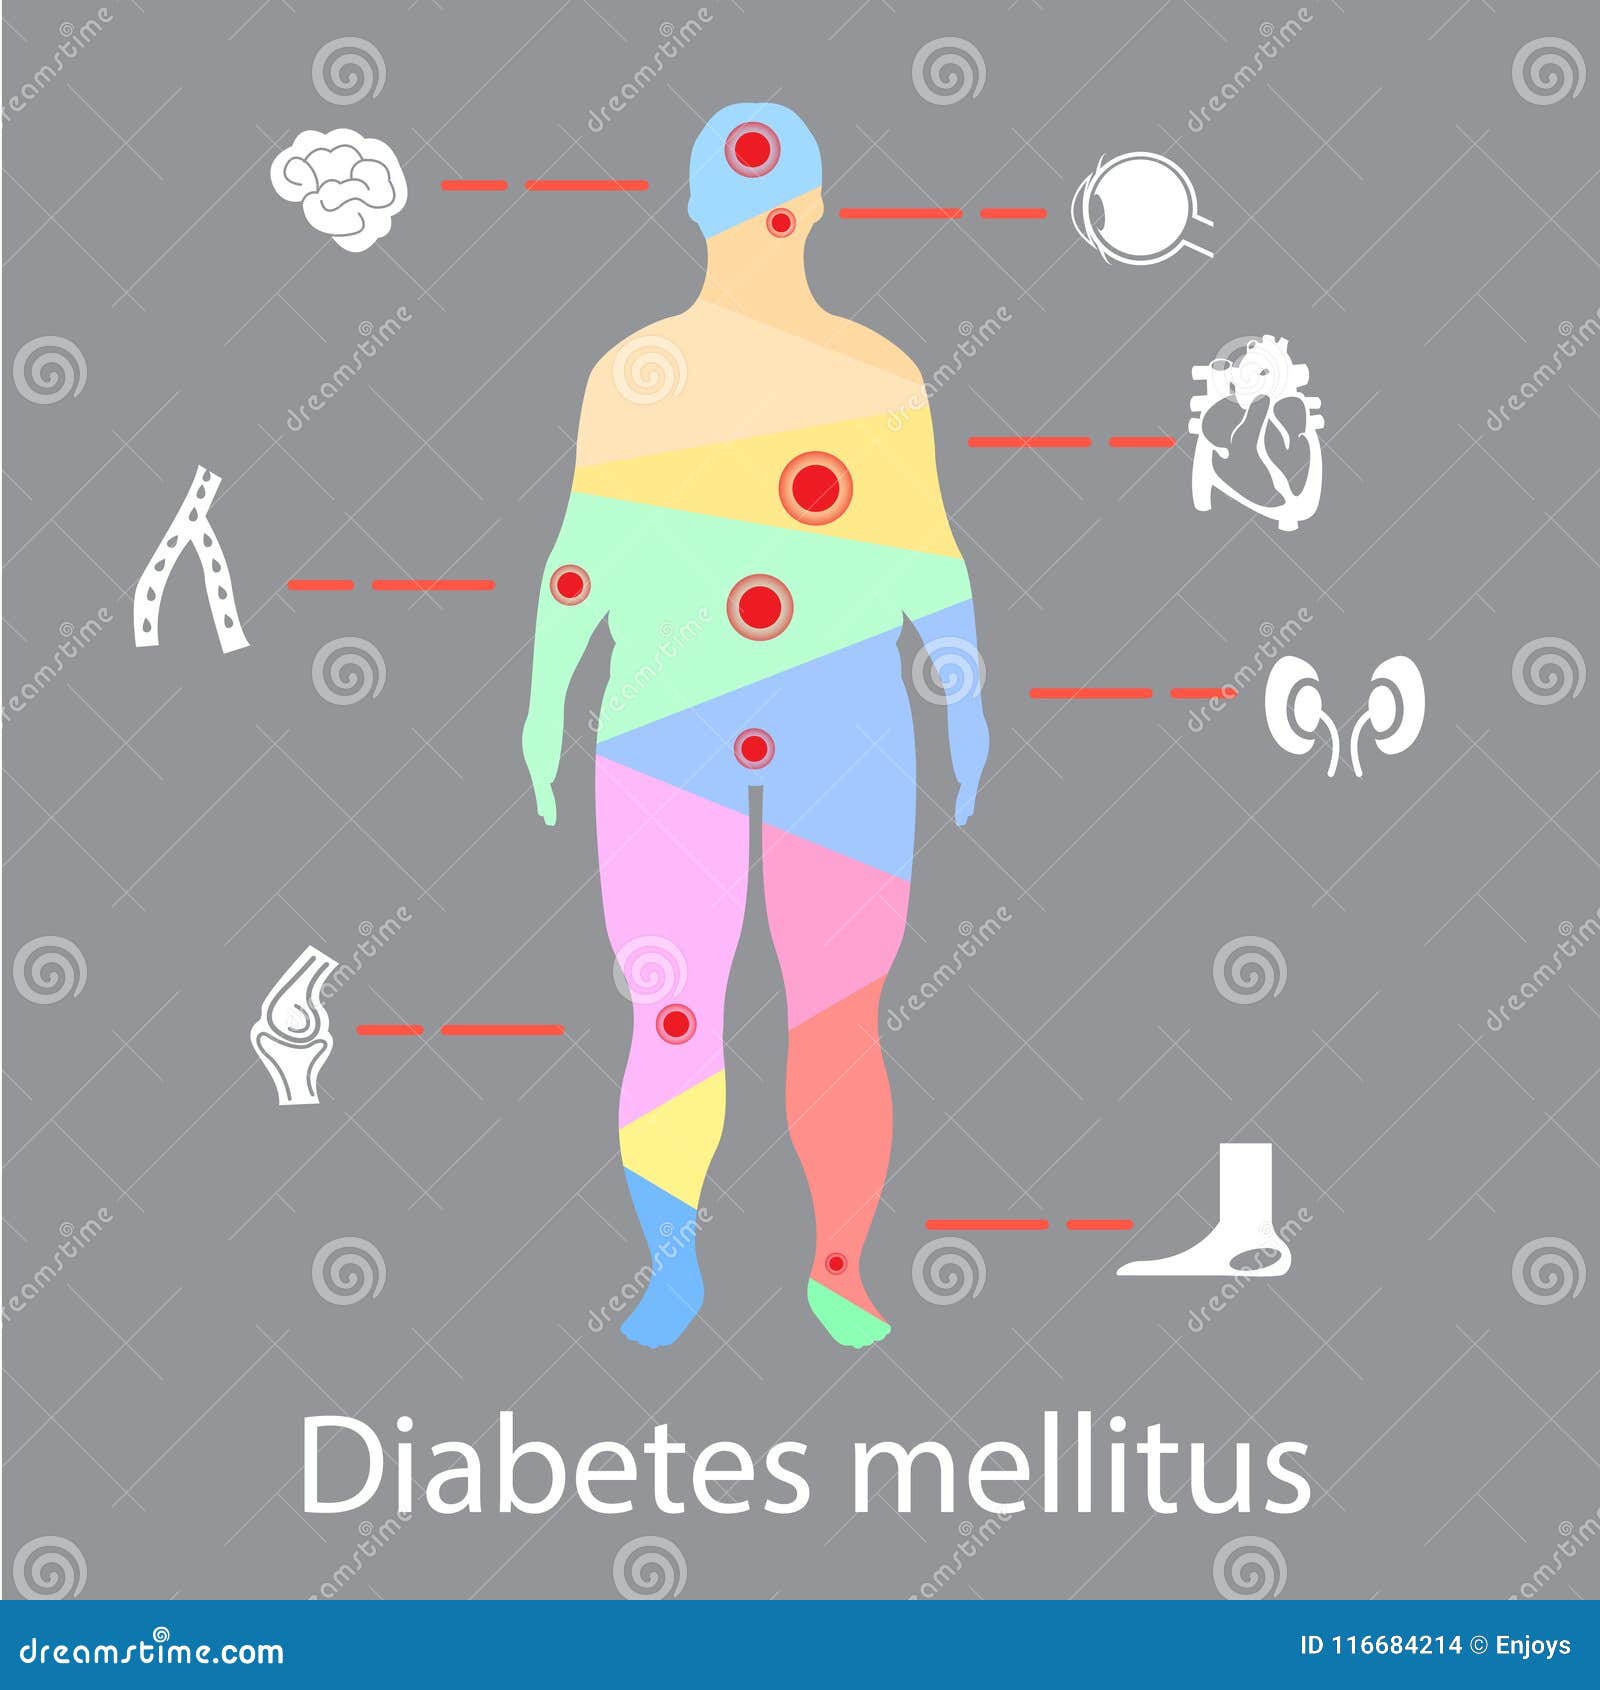 Complications of Diabetes Mellitus in Fat People. Illustration in  Infographic Style about Medical and Health Stock Vector - Illustration of  brain, anatomy: 116684214